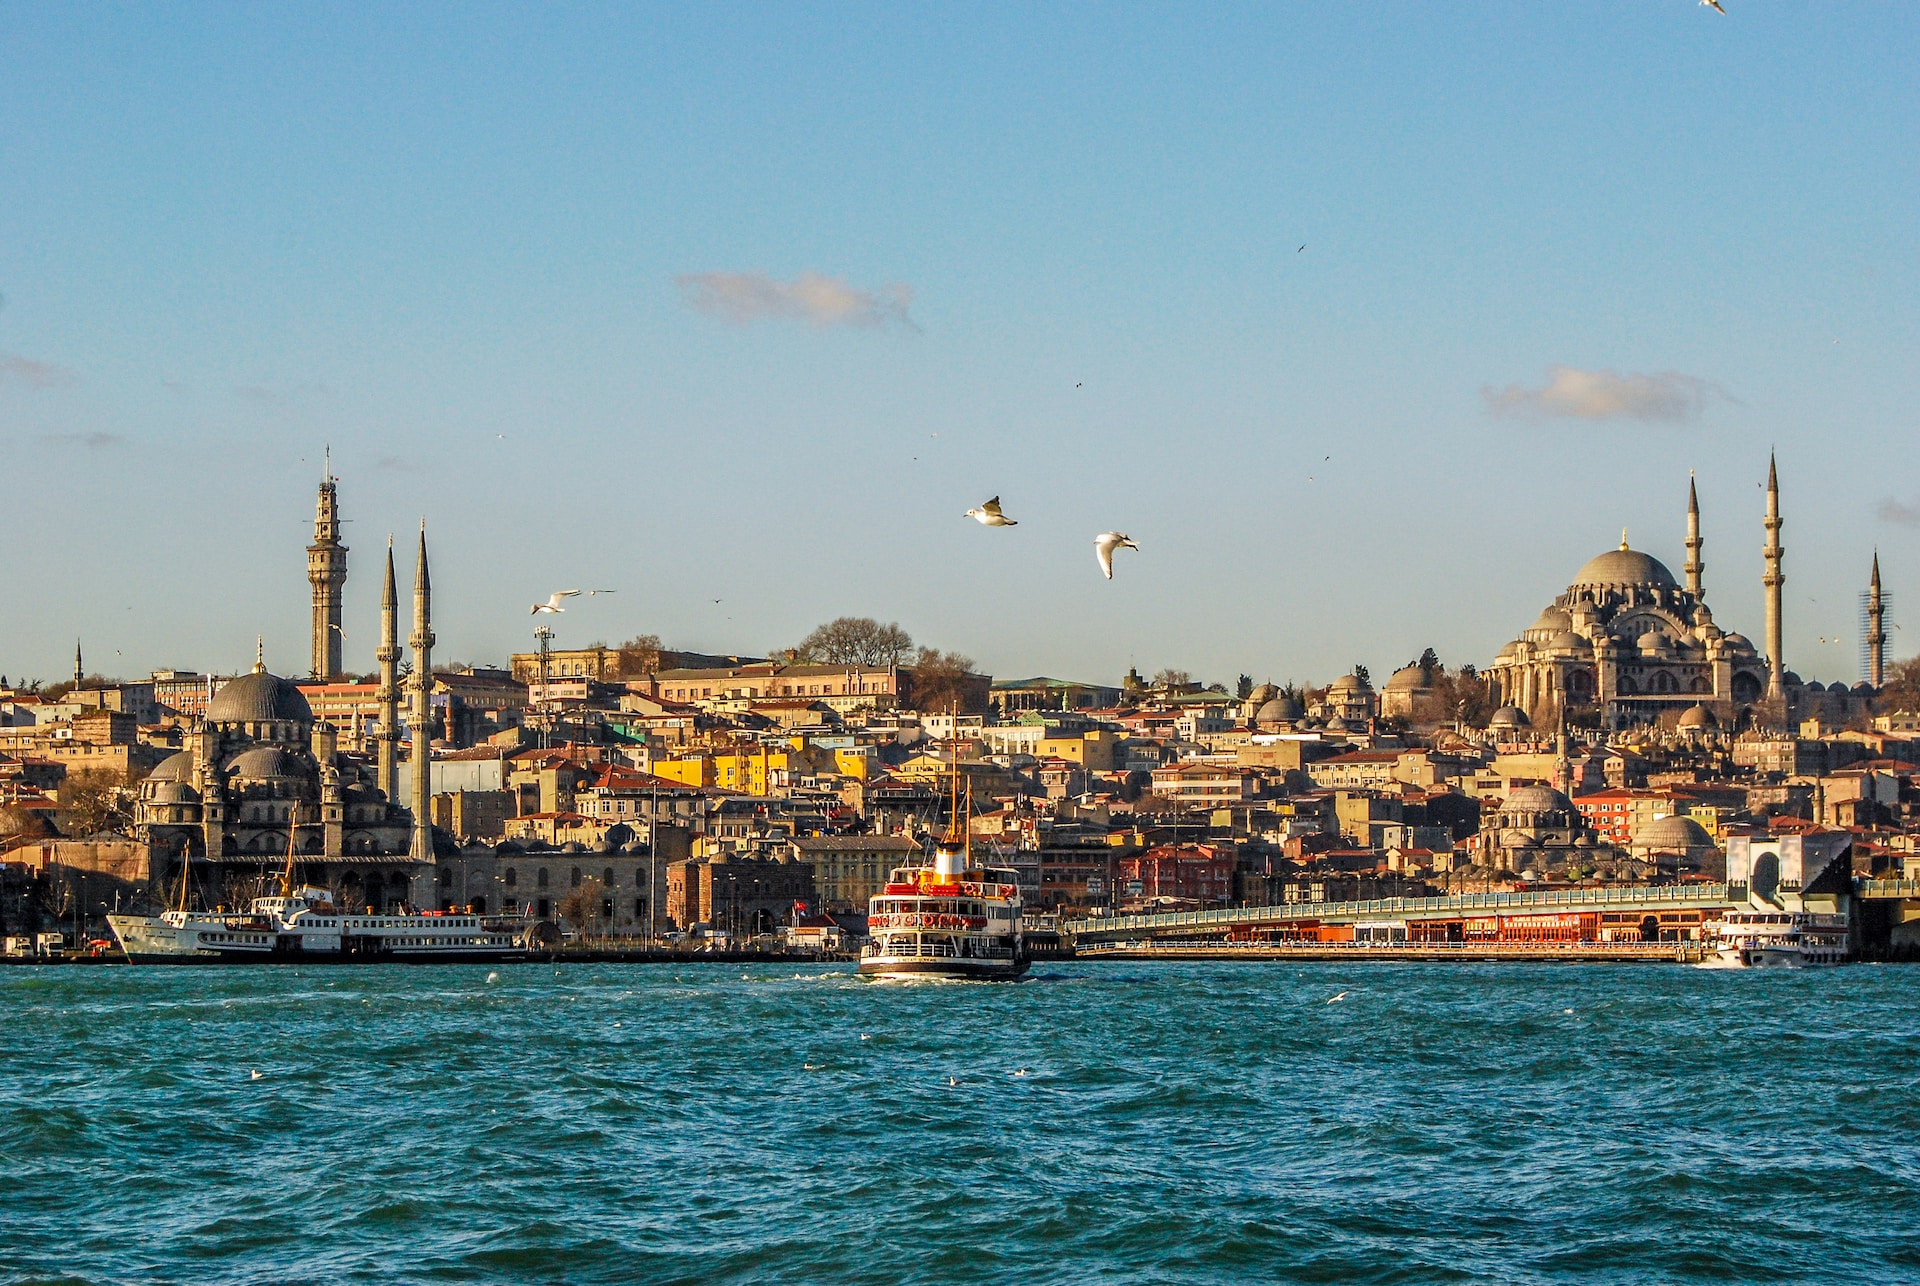 IPCC-60 in Istanbul: The work programme of the IPCC will set future priorities for climate research